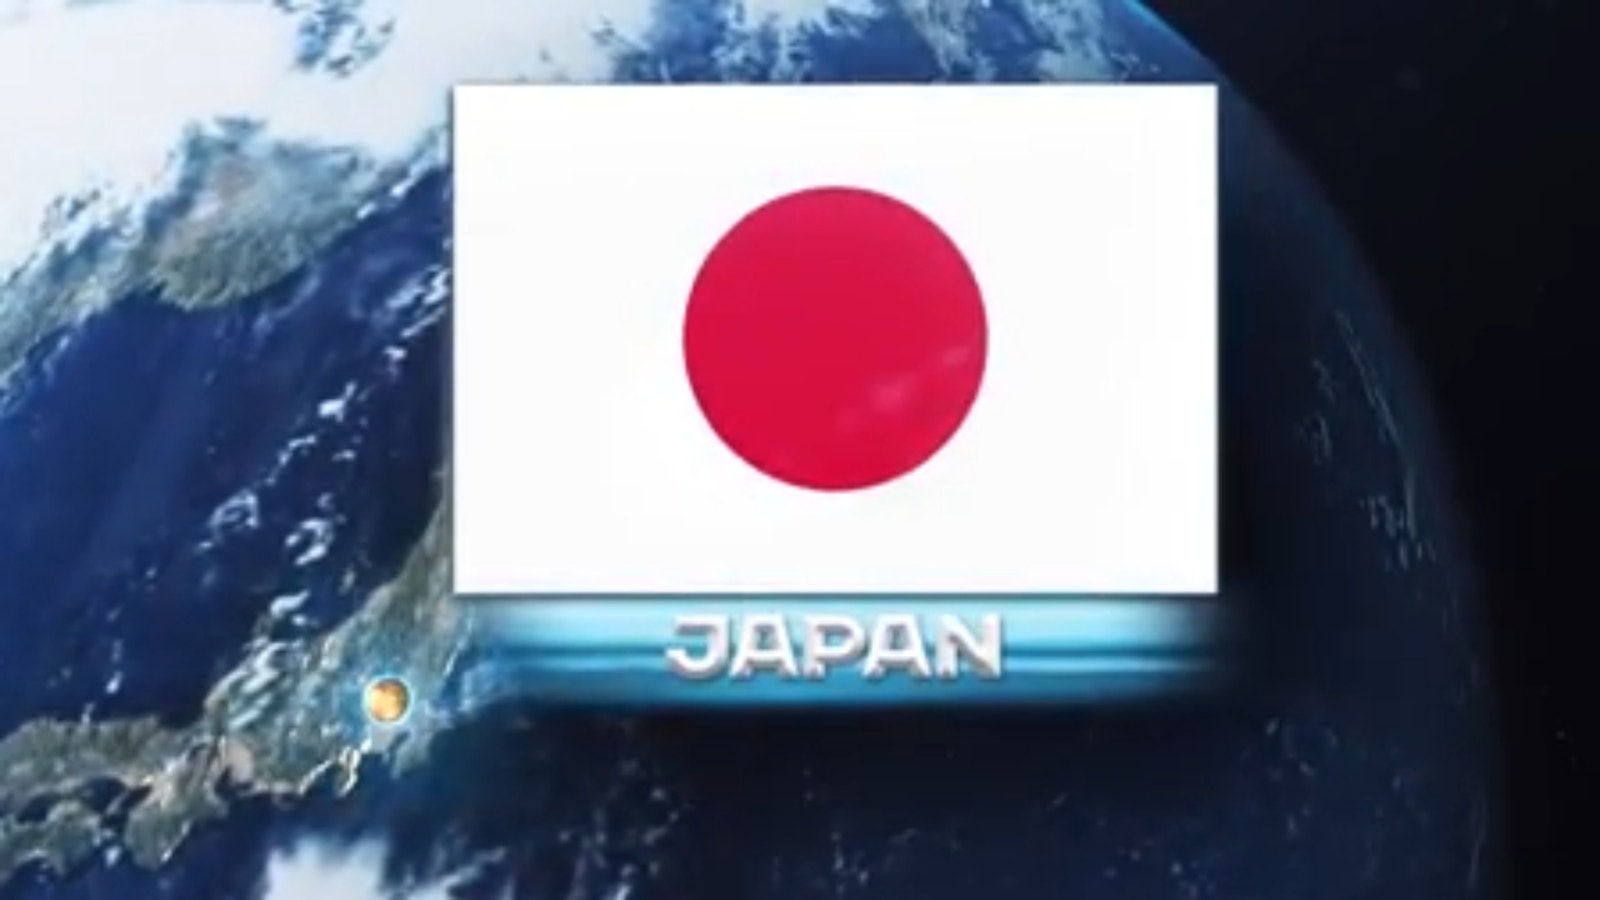 2023 FIFA Women's World Cup: Japan Team Preview with Alexi Lalas